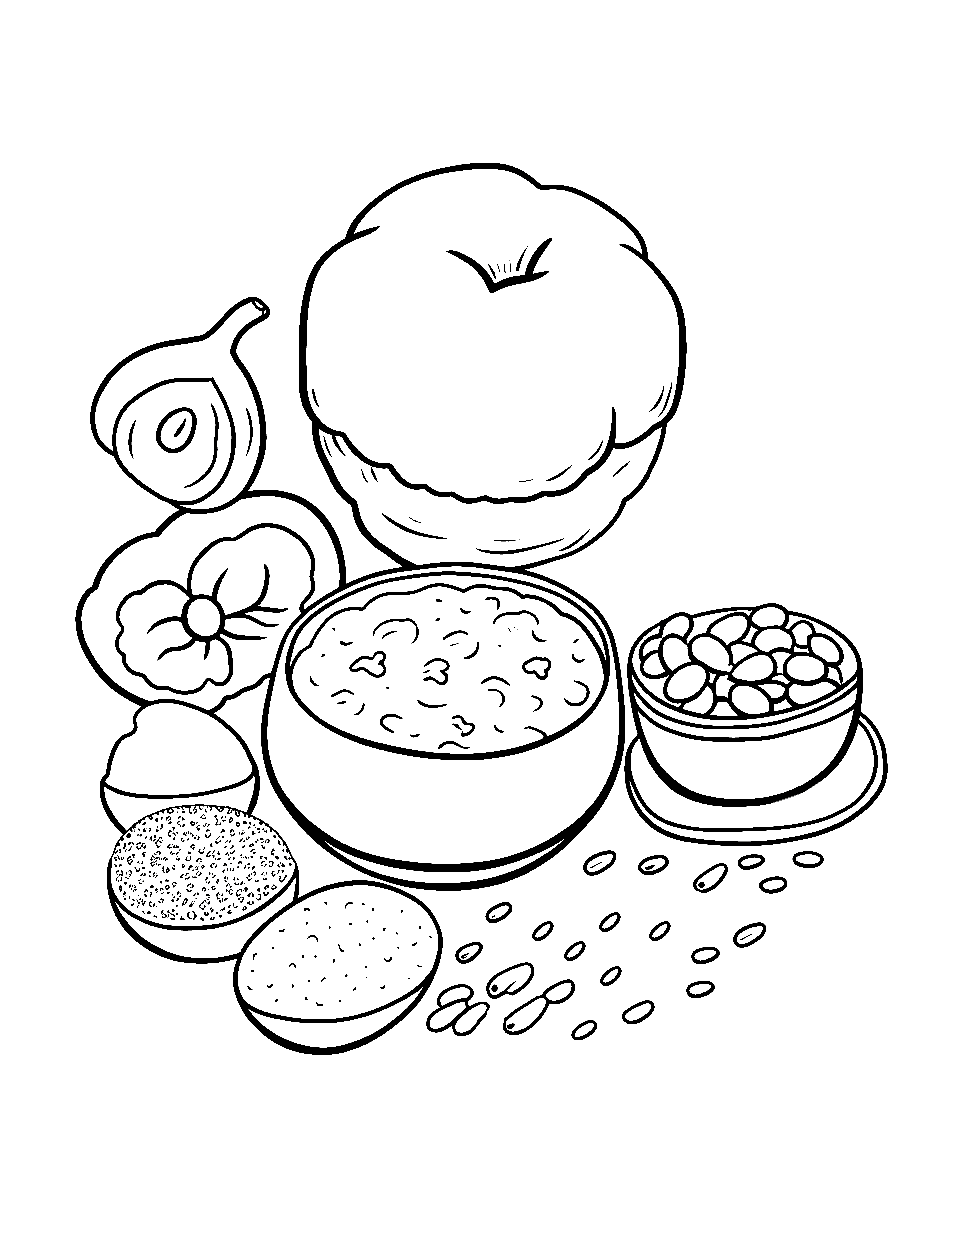 Protein Power Food Coloring Page - An assortment of protein-rich foods.